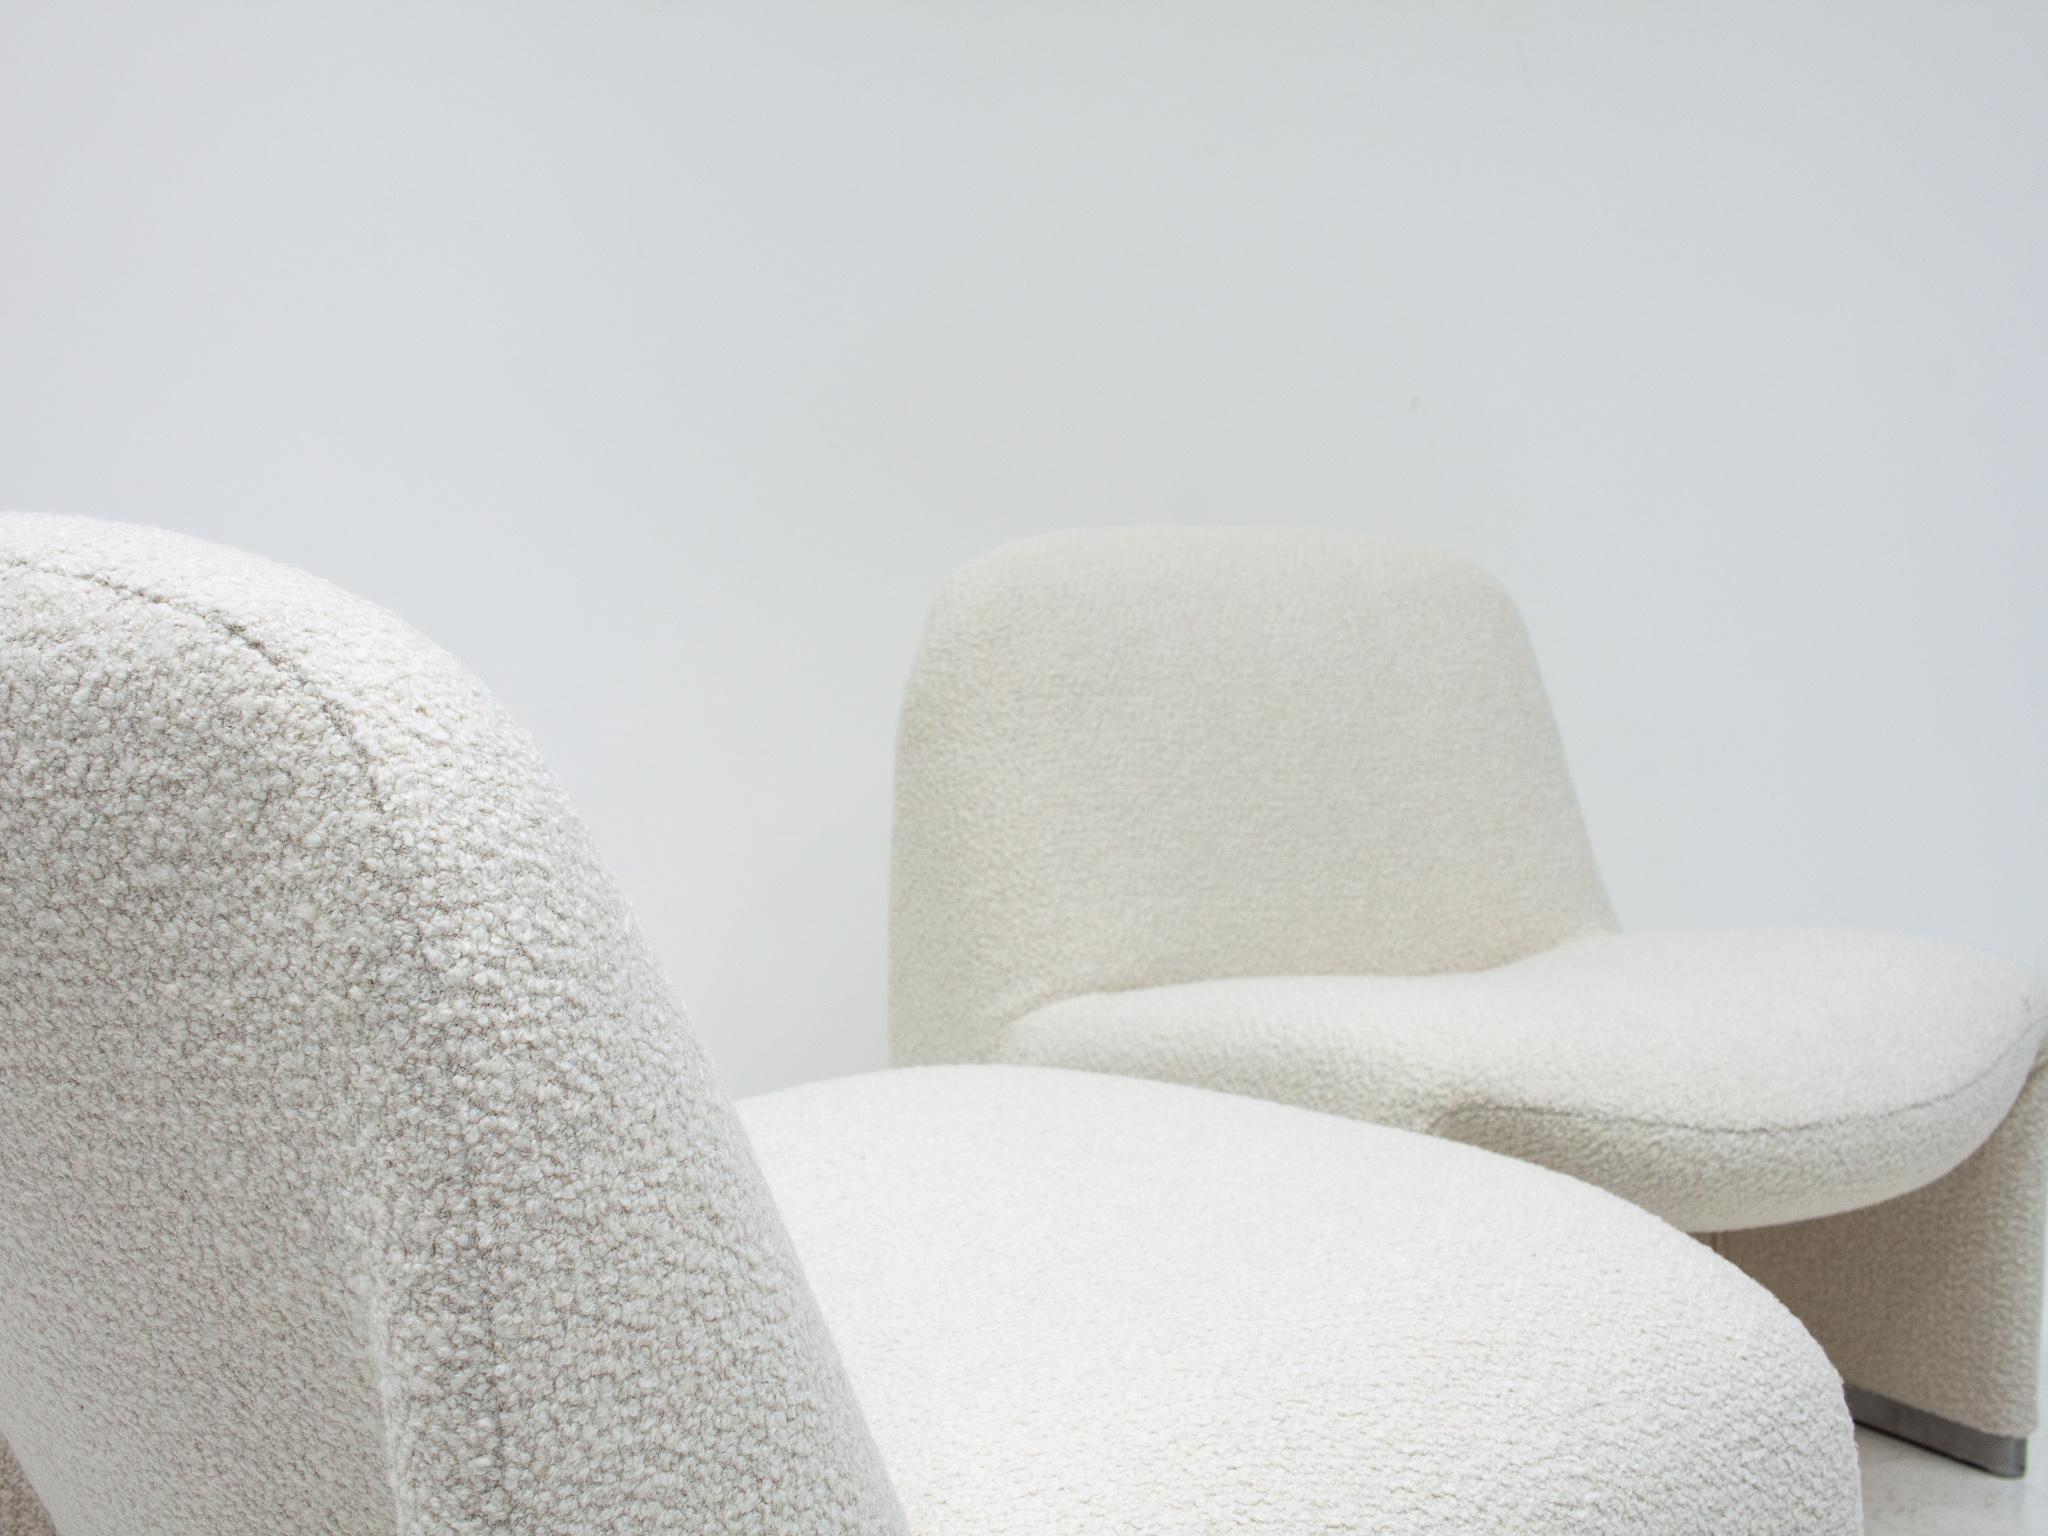 Giancarlo Piretti “Alky” Chairs In Yarn Collective bouclé *Customizable* For Sale 9